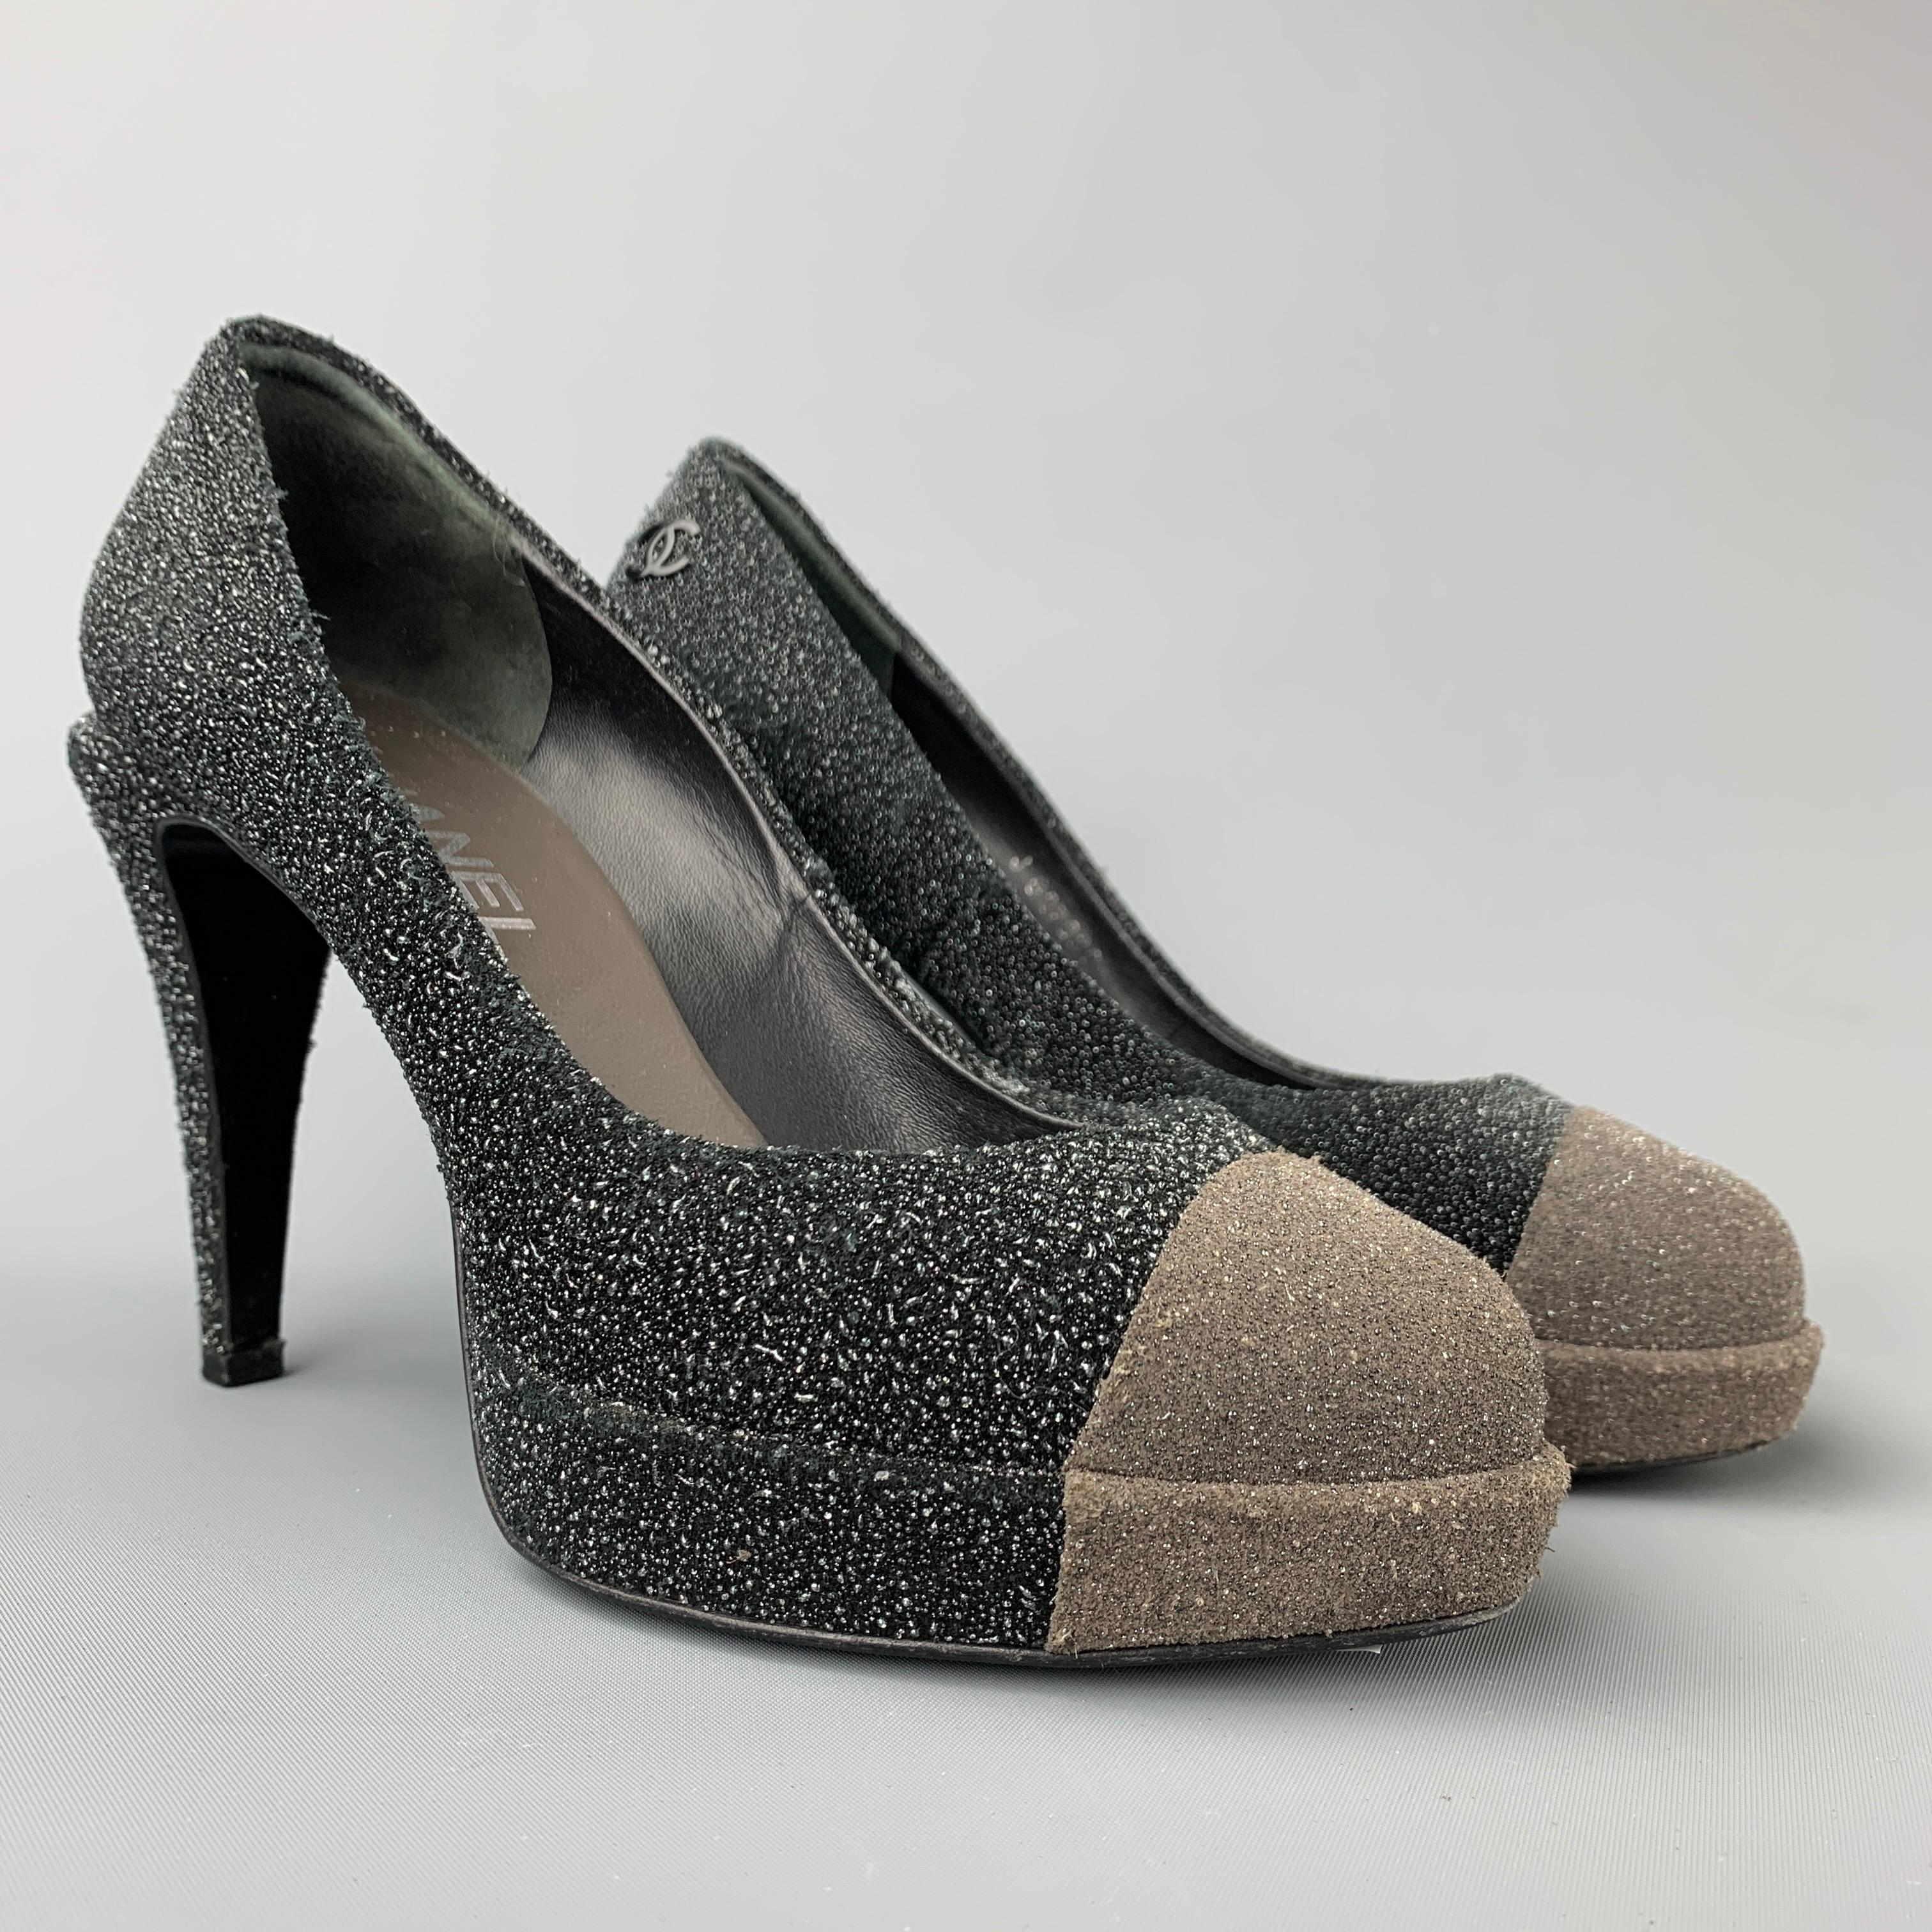 CHANEL pumps comes in a charcoal & grey sparkle textured material featuring a chanel logo detail, platform,and a stacked heel. Made in Italy.

Very Good Pre-Owned Condition.
Marked: EU 37

Measurements:

Heel: 4 in.
Platform: 0.5 in. 

